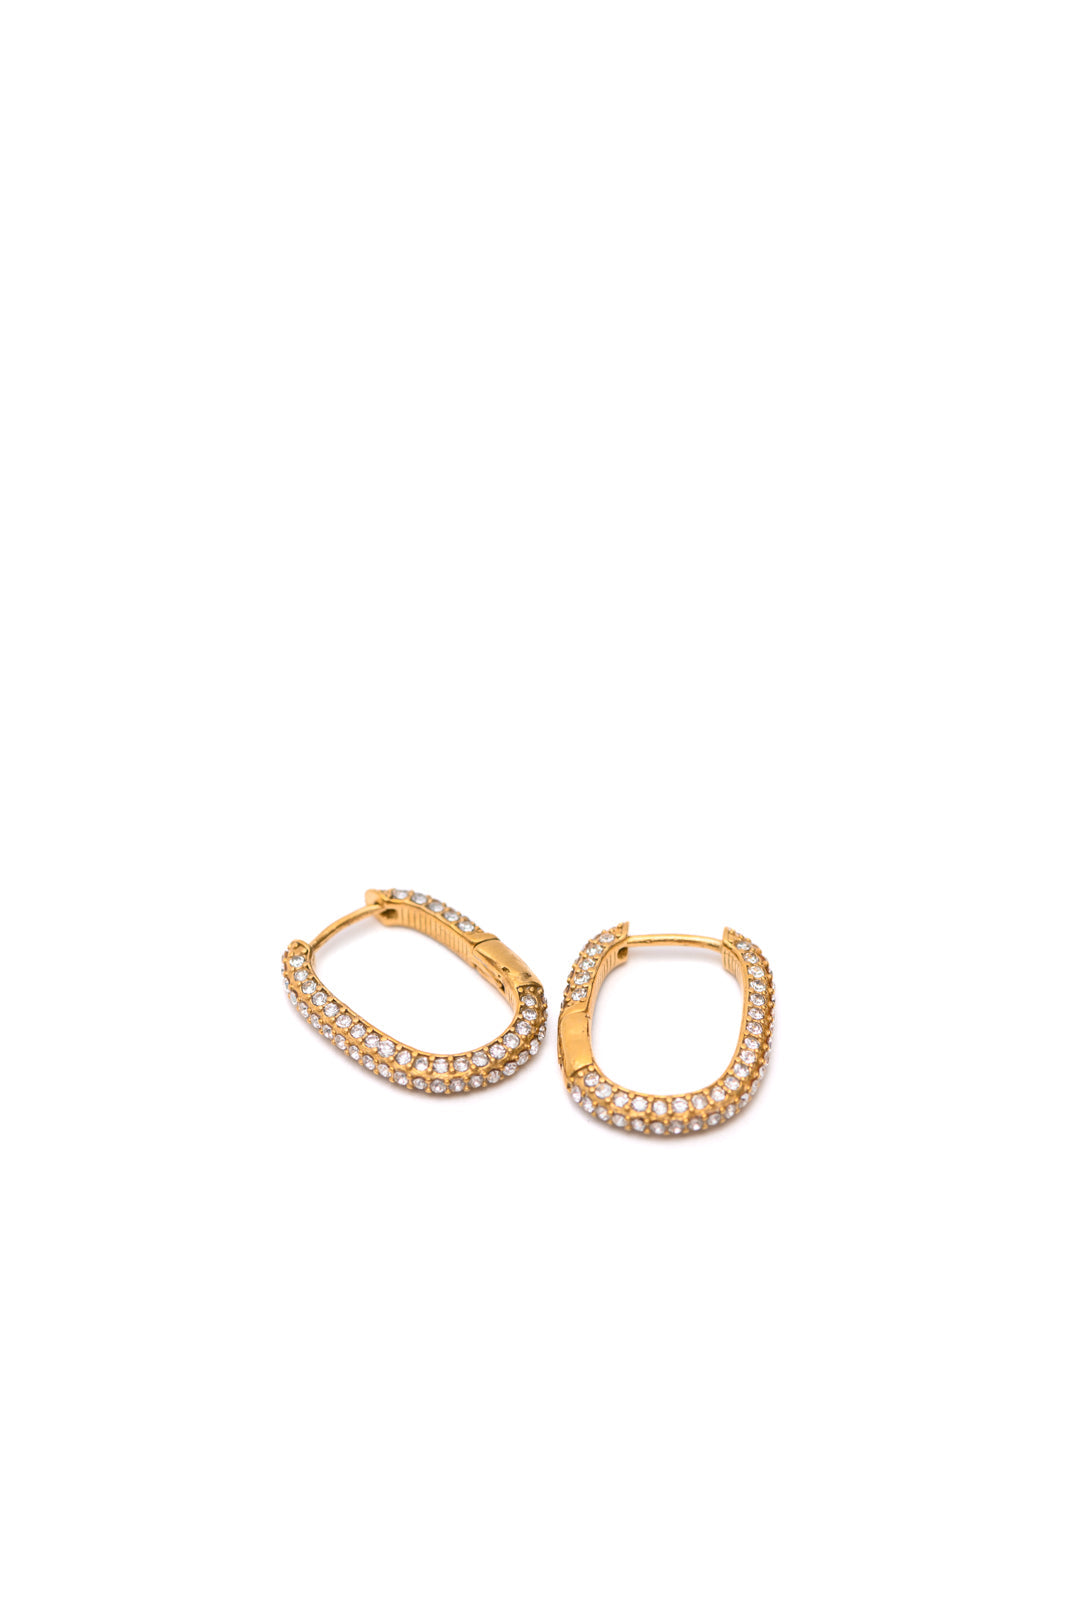 Blinged Out Huggie Earrings - Lola Cerina Boutique